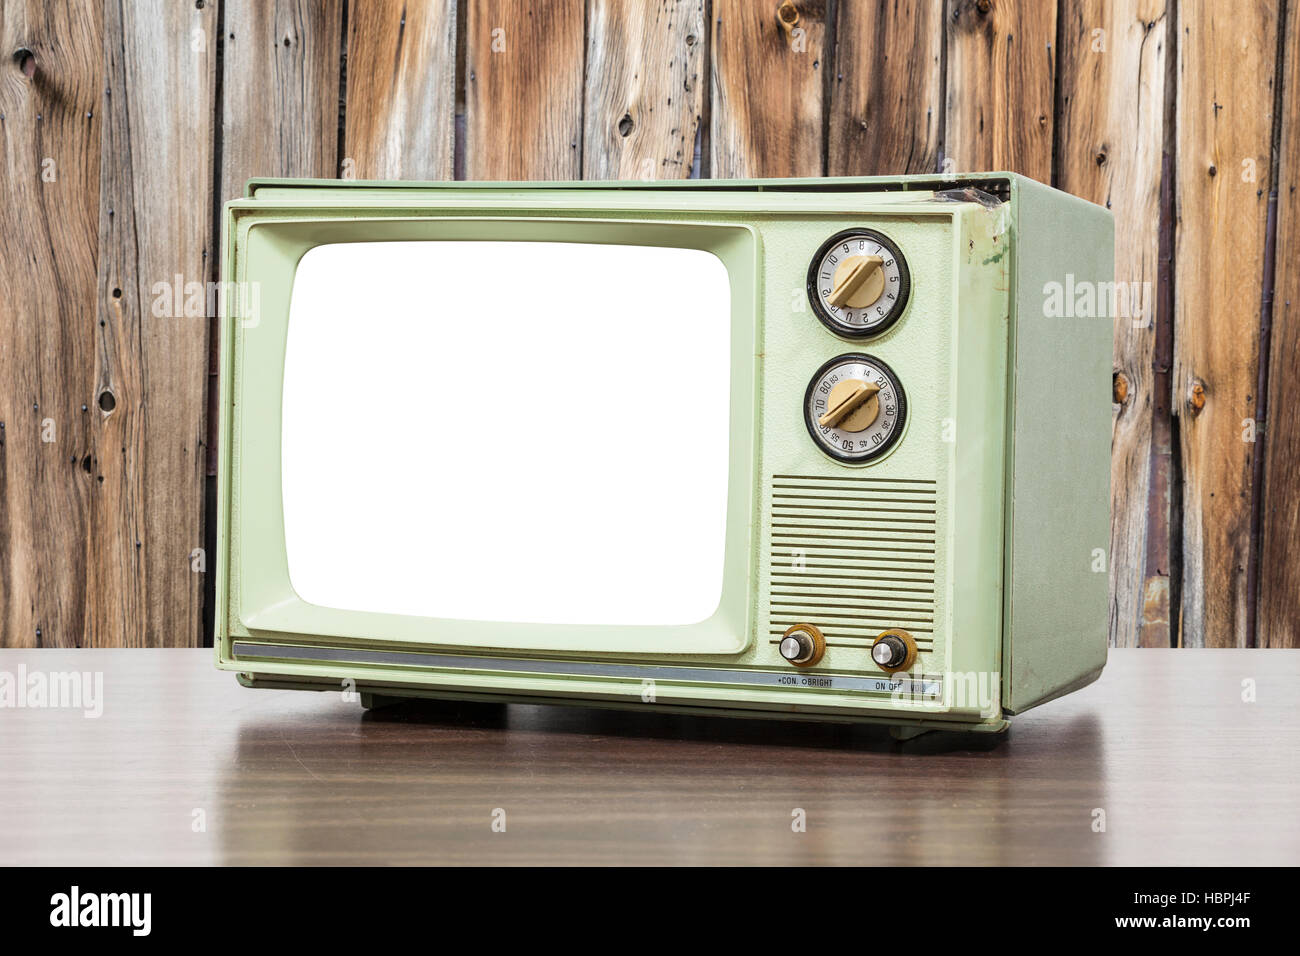 Green vintage television with old wood wall. Stock Photo